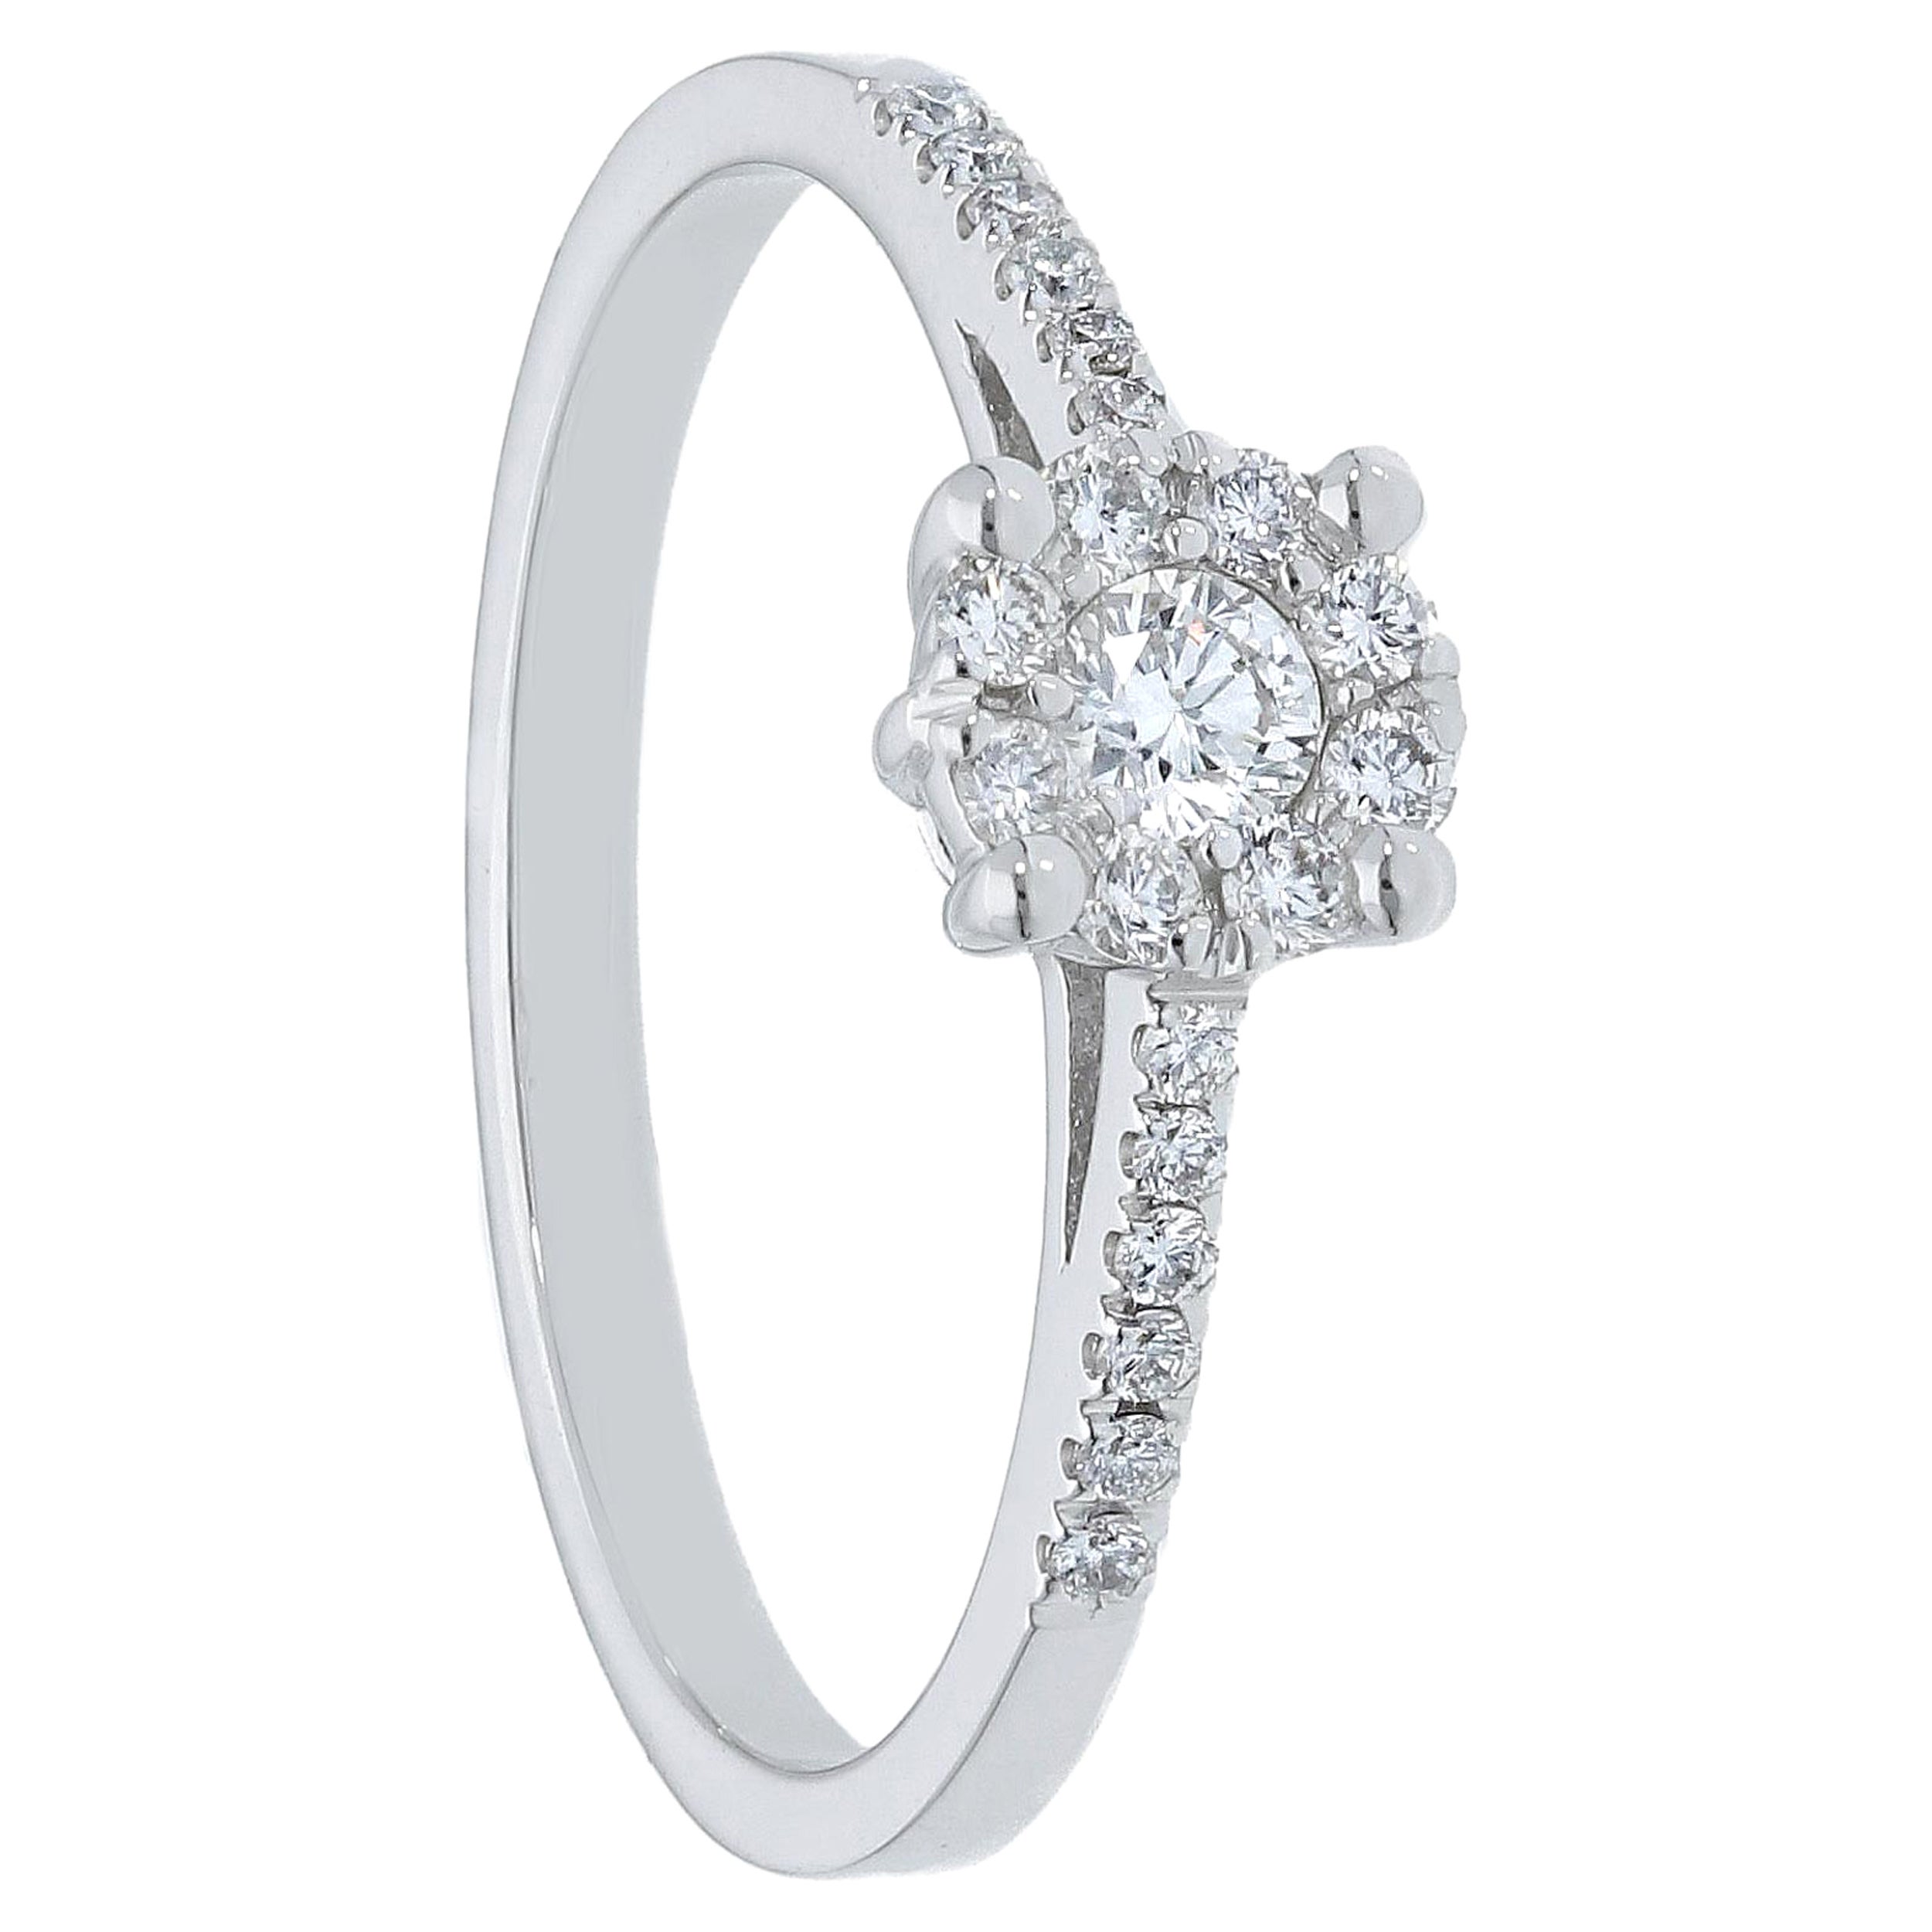 For Sale:  18K White Gold Pradera Magic Engagement Ring with Diamonds